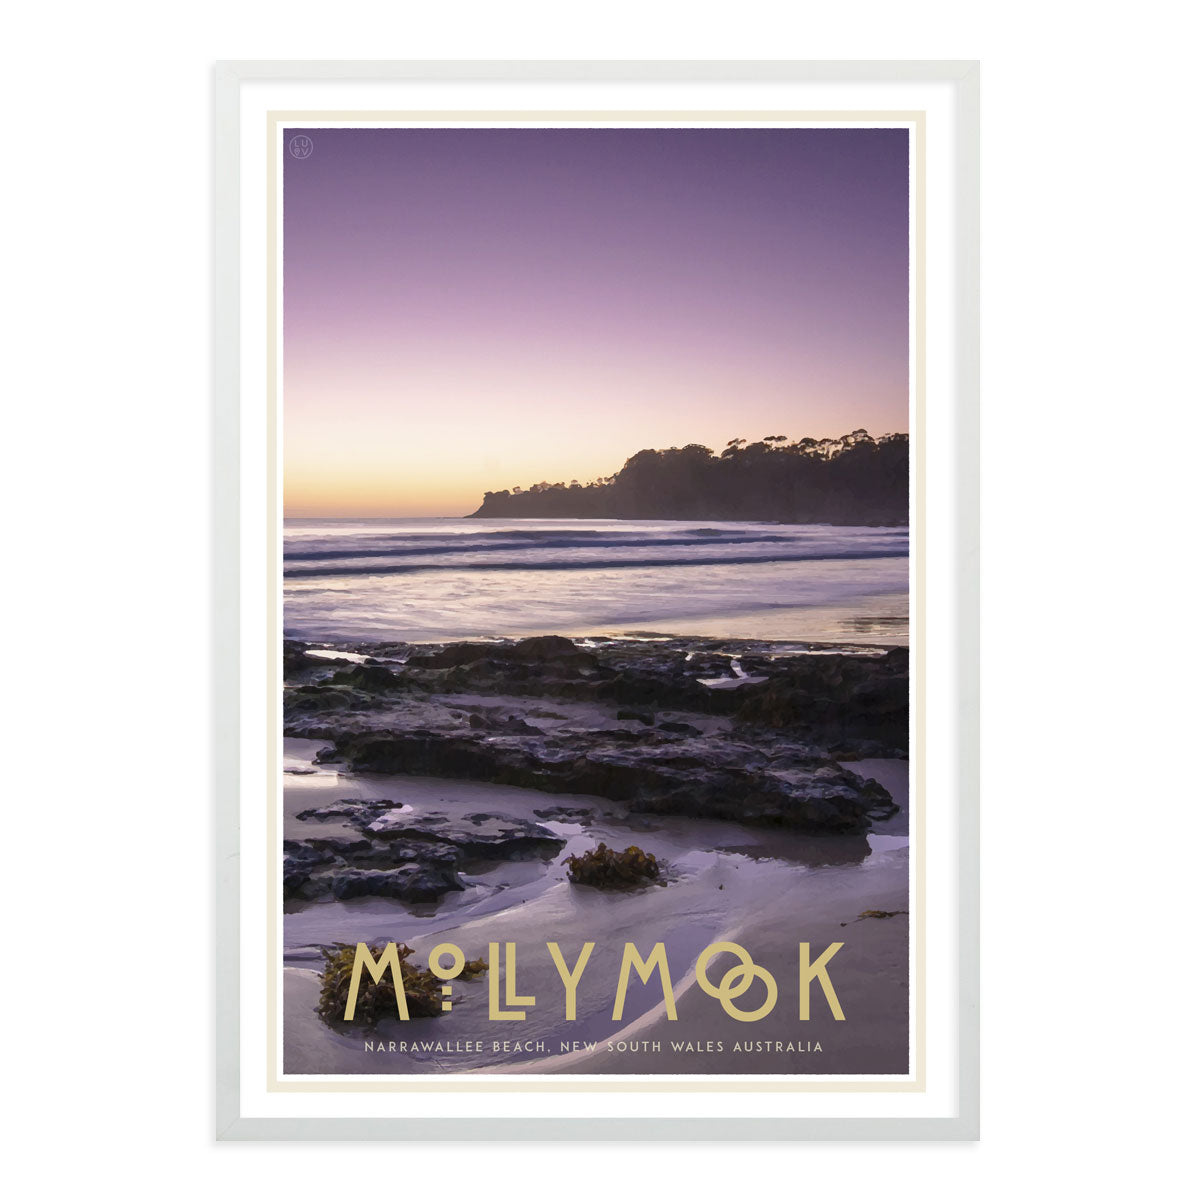 Mollymook print vintage travel style. Original design by Places We Luv